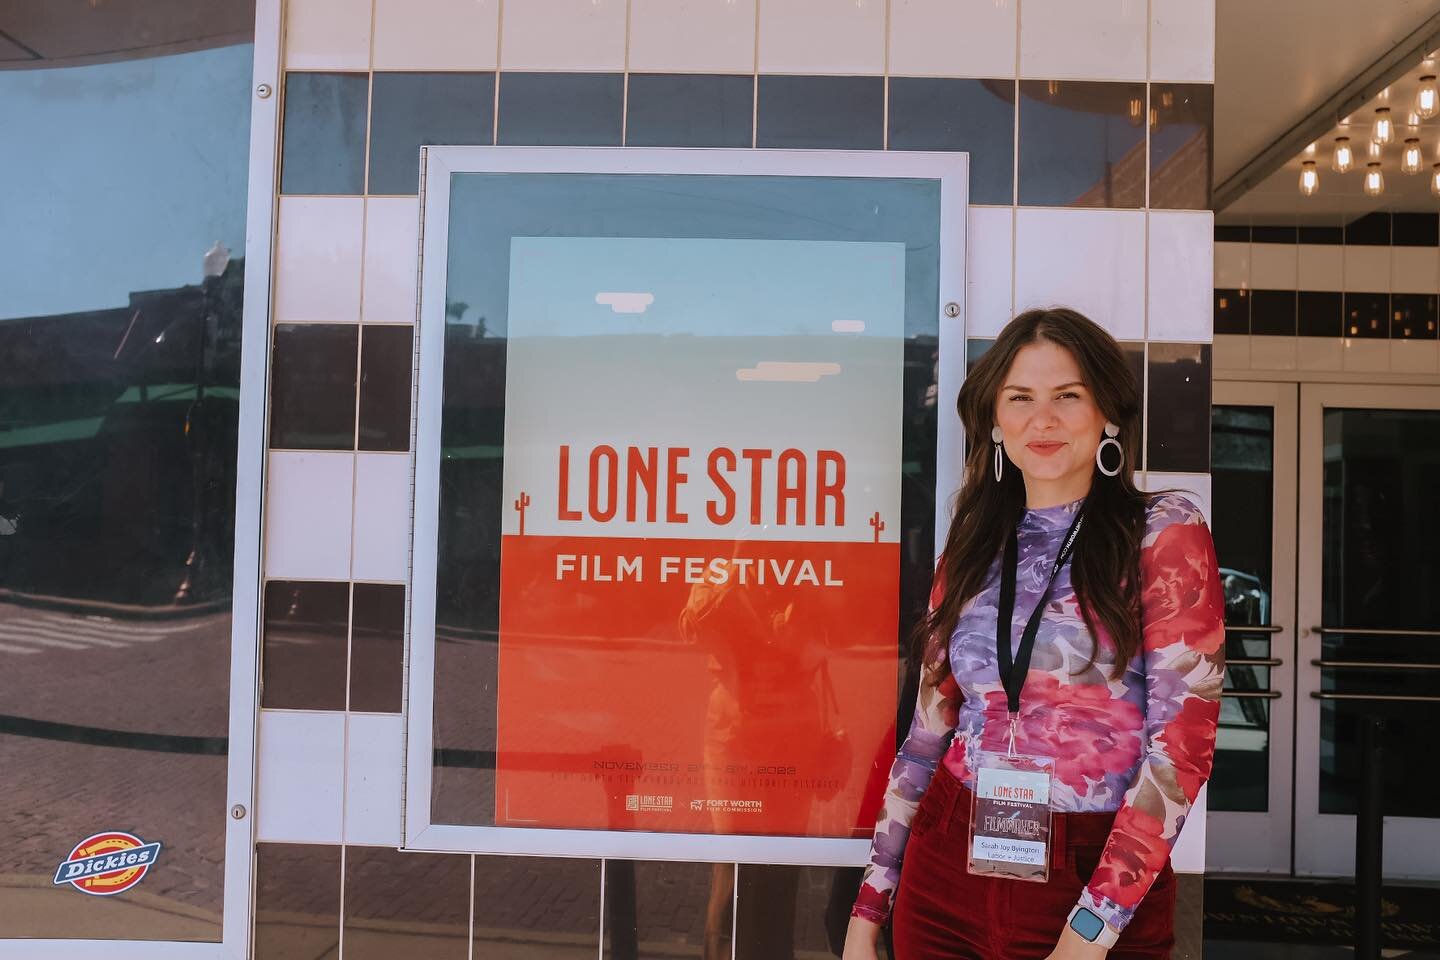 Thank you @lonestarfilmfest for including Labor+Justice among some incredibly impactful films. We feel so honored 🫶🏽